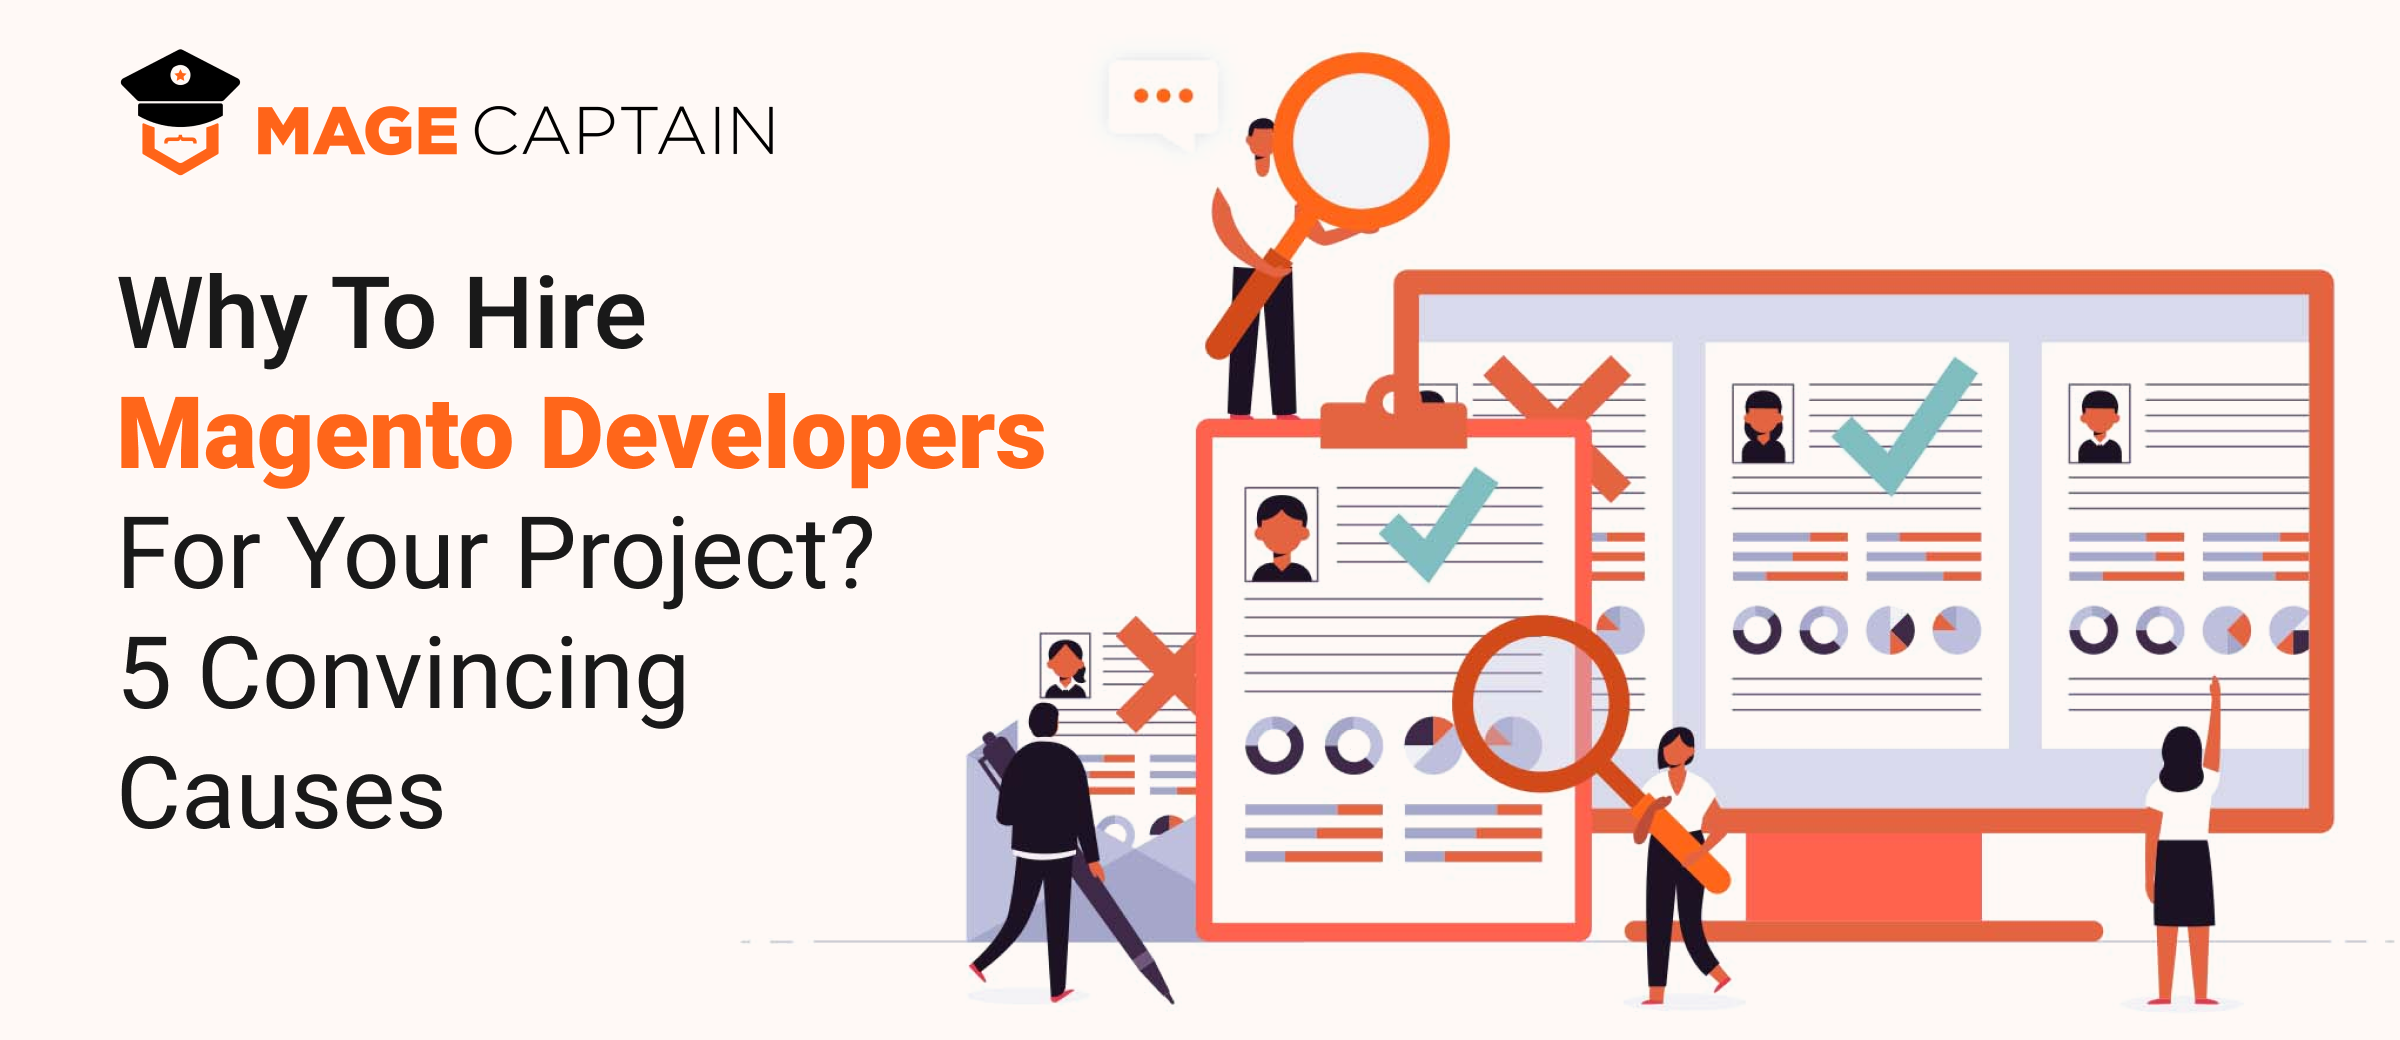 Hire Magento Developers For Your Project